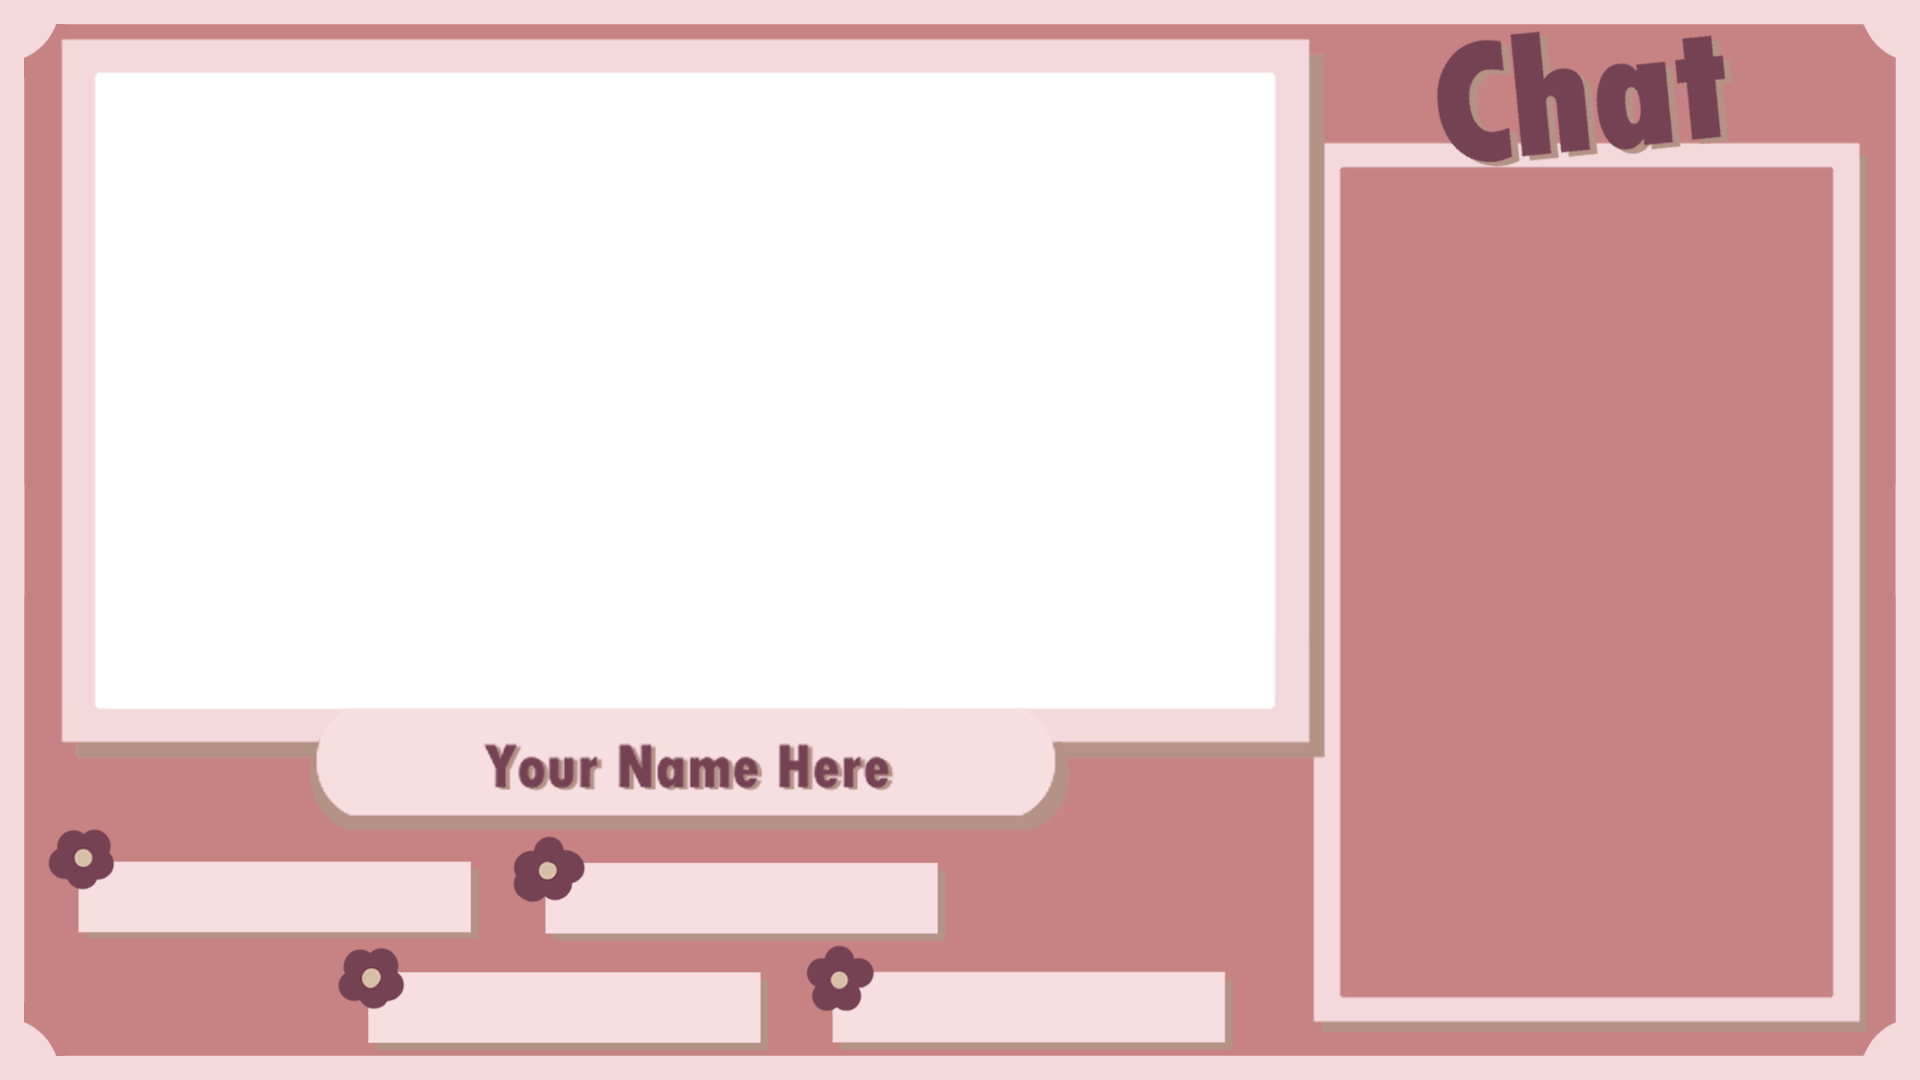 FREE Just Chatting Screen, Twitch Chat Overlay